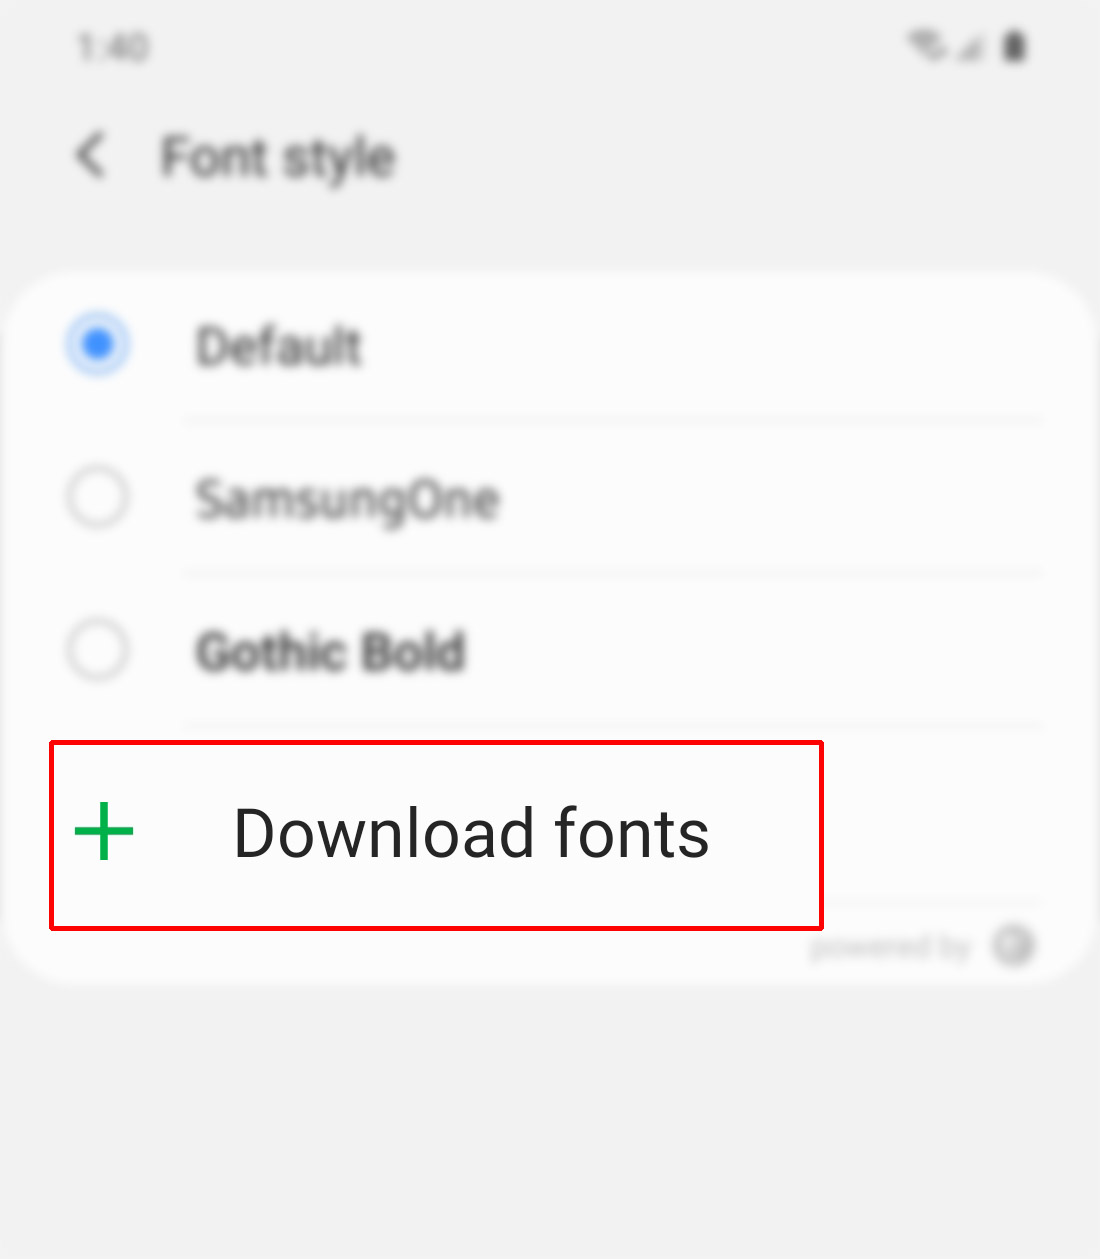 download new fonts on galaxy s20 - download fonts